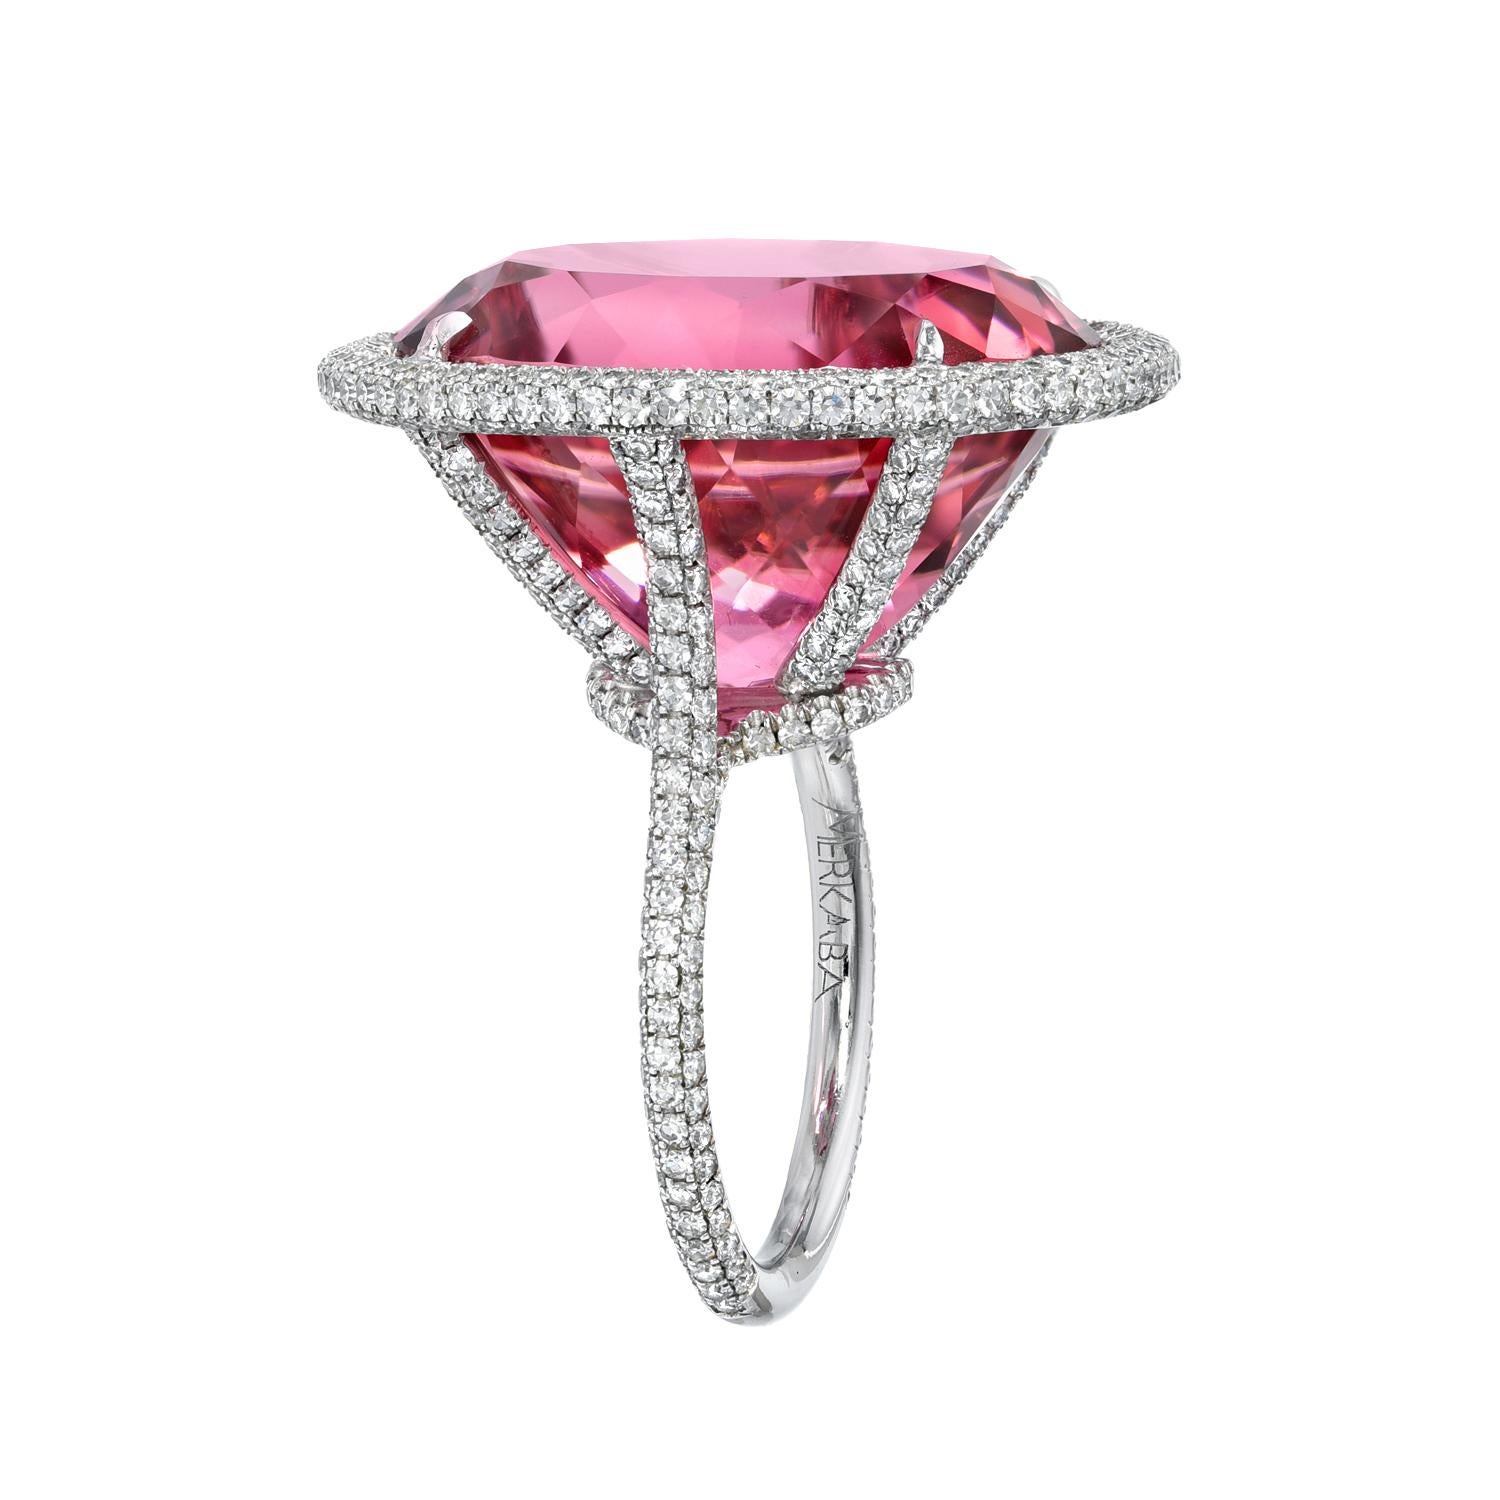 World-class 29.79 carat flawless vivid Pink Tourmaline oval platinum ring, decorated with impeccably, micro-set collection diamonds (D-F/VVS-VS1), weighing a total of 1.91 carats. 
Ring size 5.75. Resizing is complimentary upon request. 
Returns are